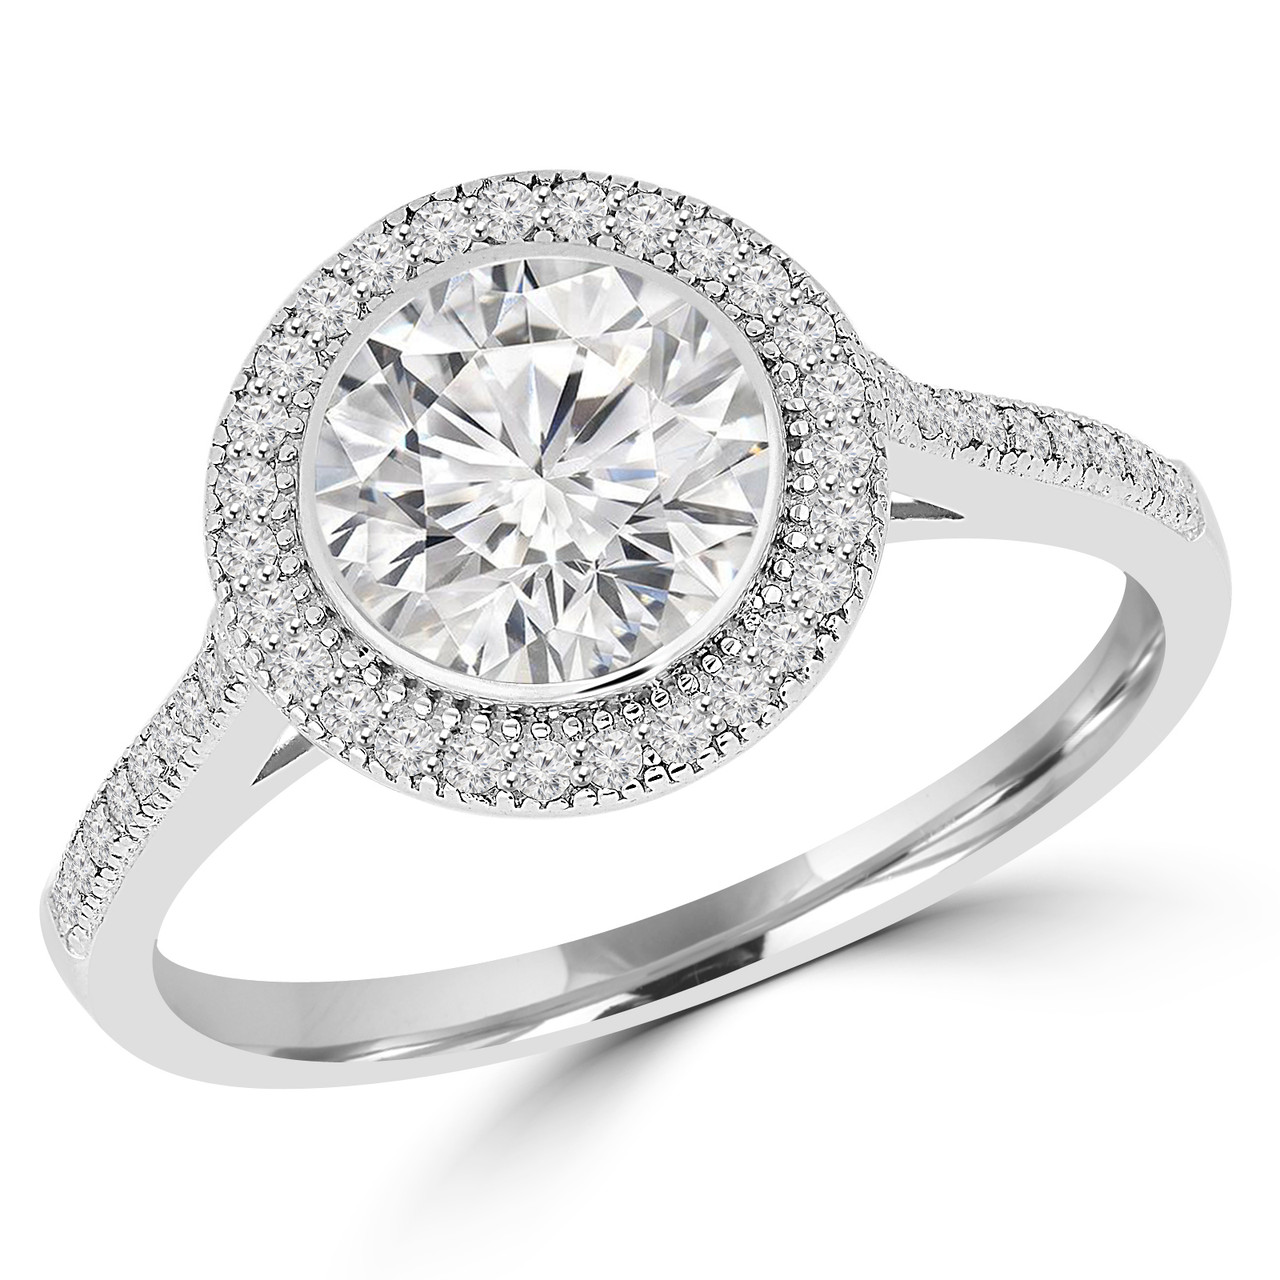 18ct White Gold Diamond Halo Engagement Ring | Autumn and May